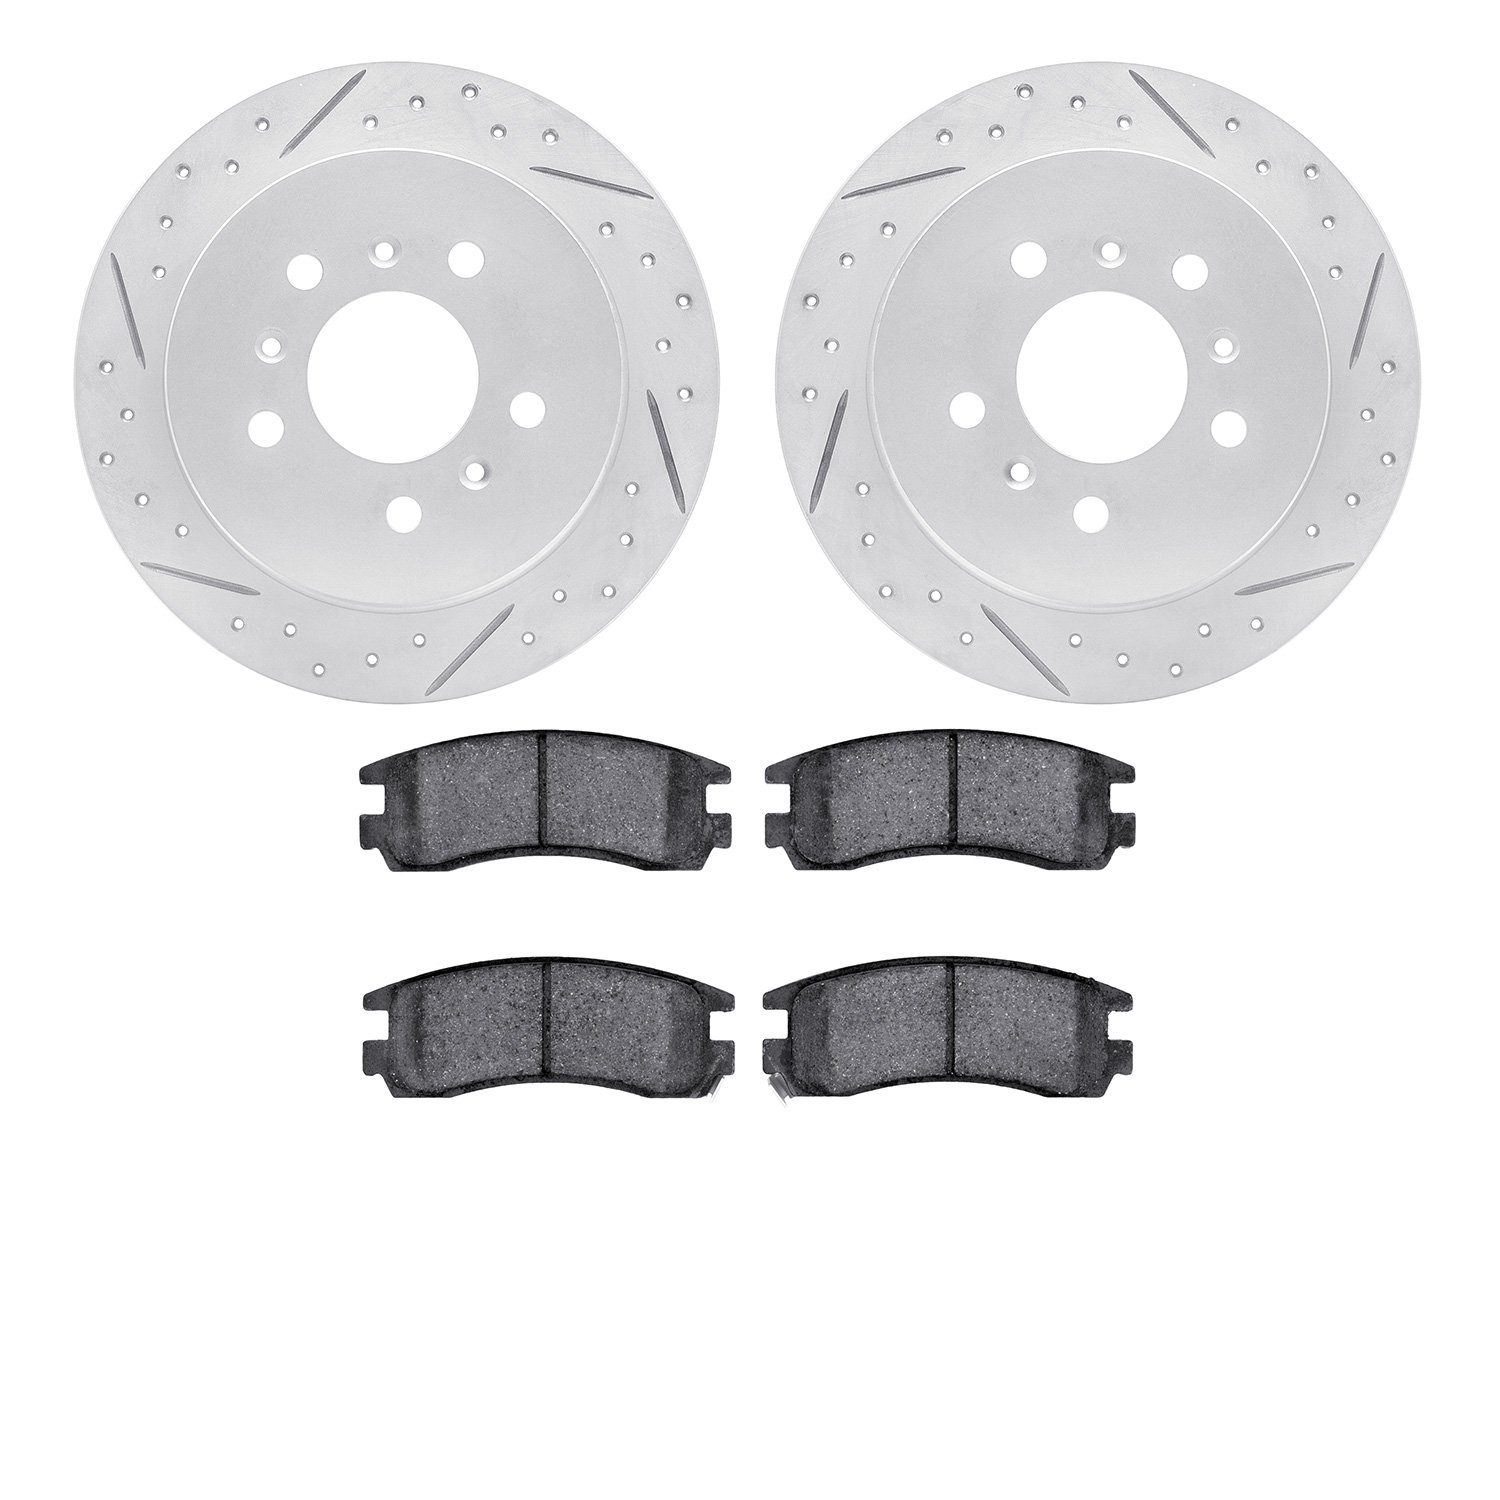 2502-45009 Geoperformance Drilled/Slotted Rotors w/5000 Advanced Brake Pads Kit, 2006-2010 GM, Position: Rear